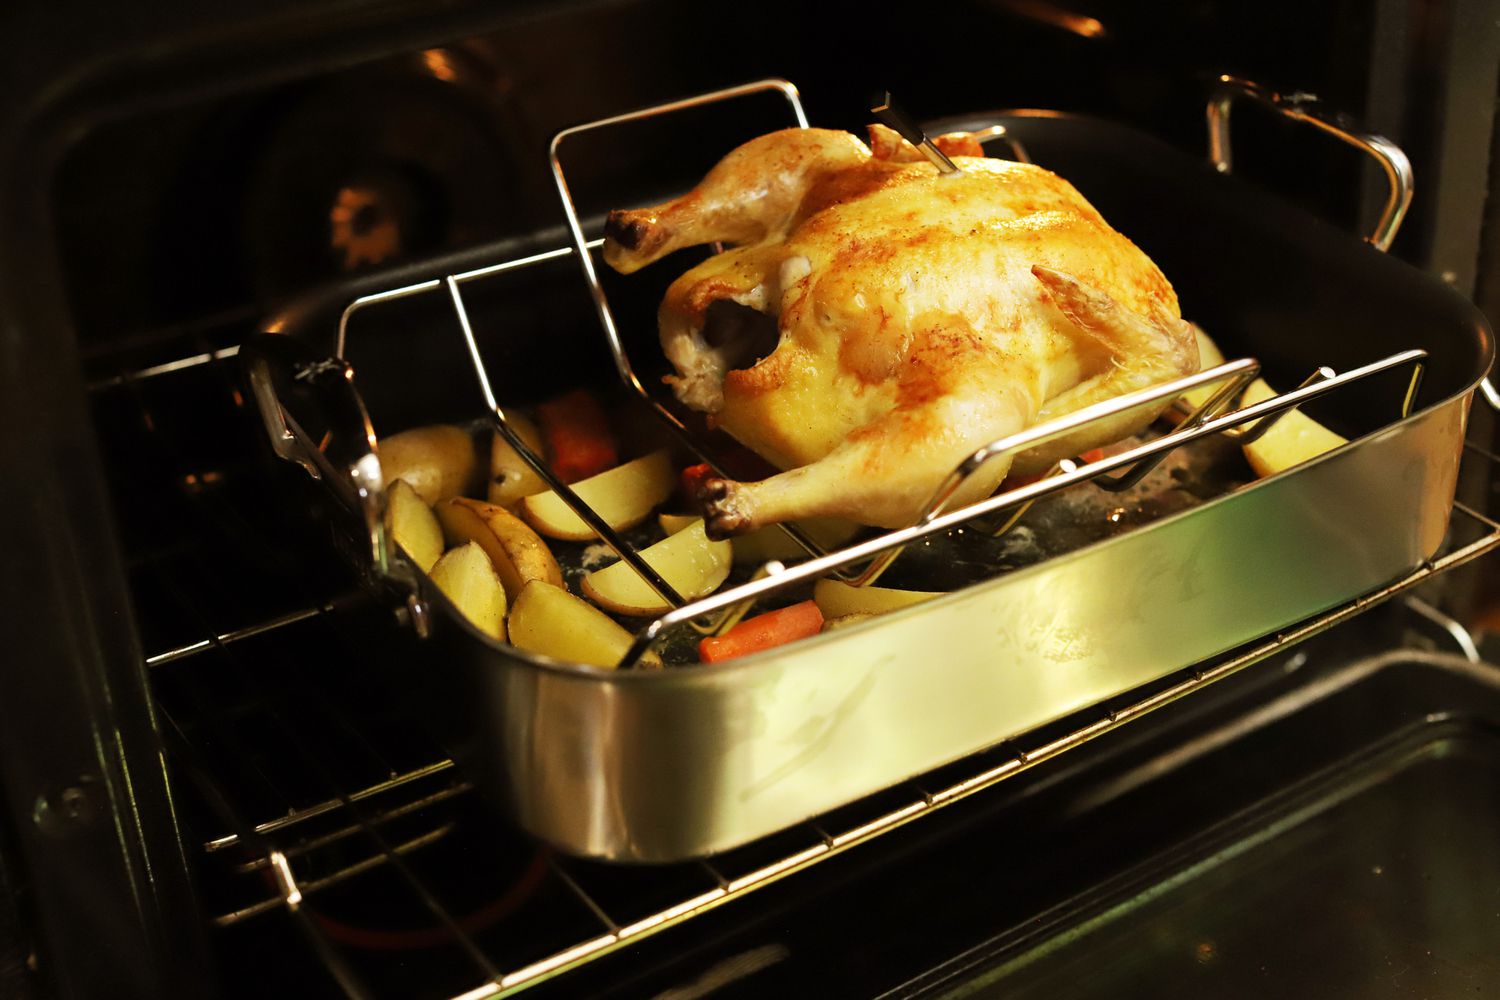 A roasted turkey in the Hestan Stainless Steel Nonstick Roaster's rack, with chopped vegetable underneath